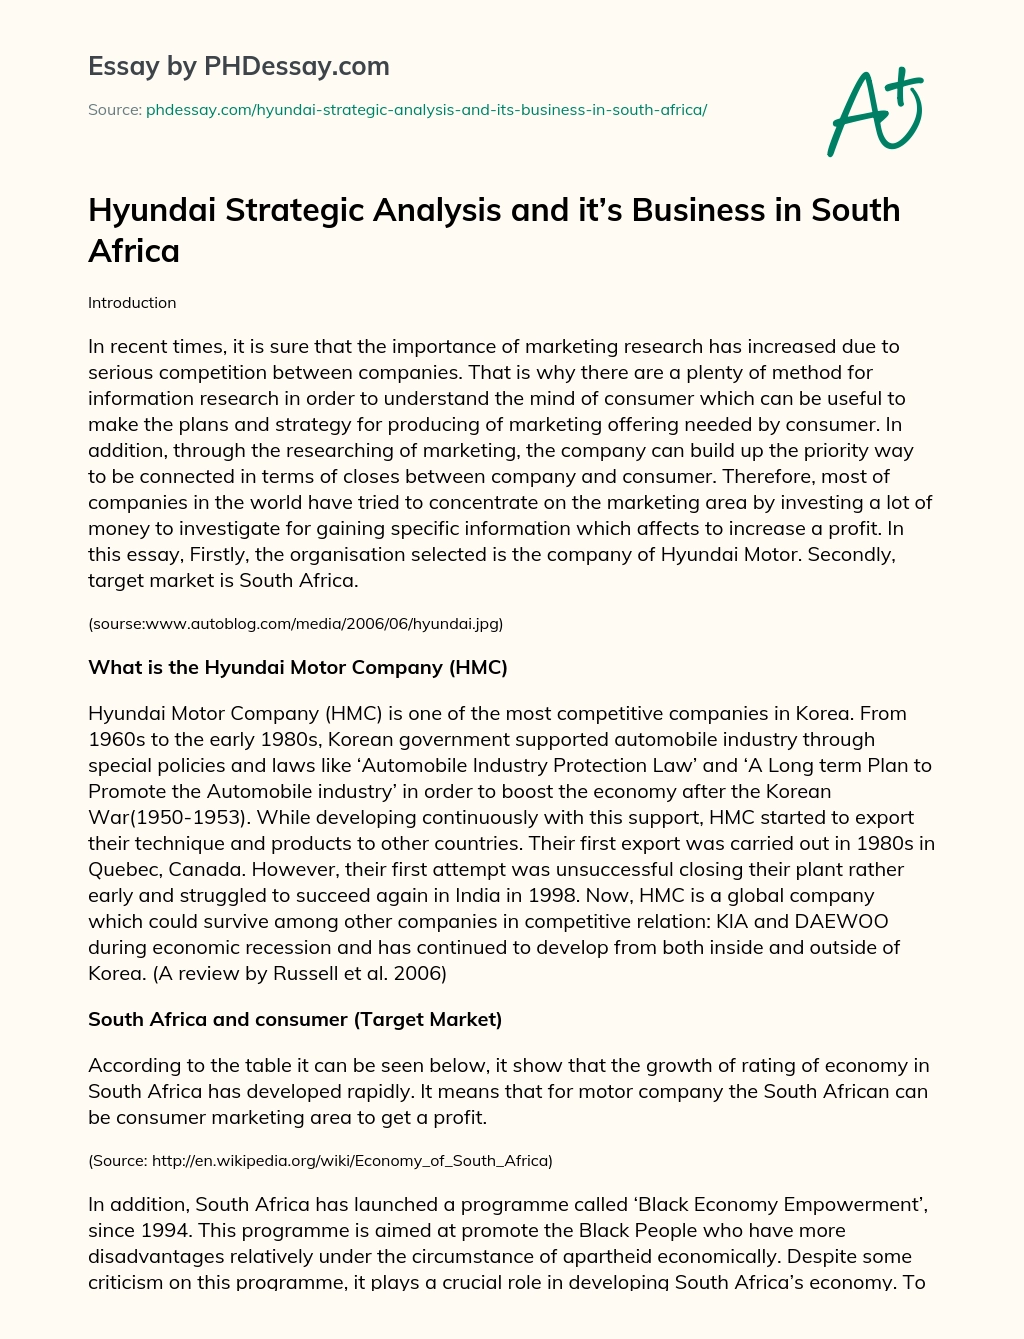 Hyundai Strategic Analysis and it’s Business in South Africa essay